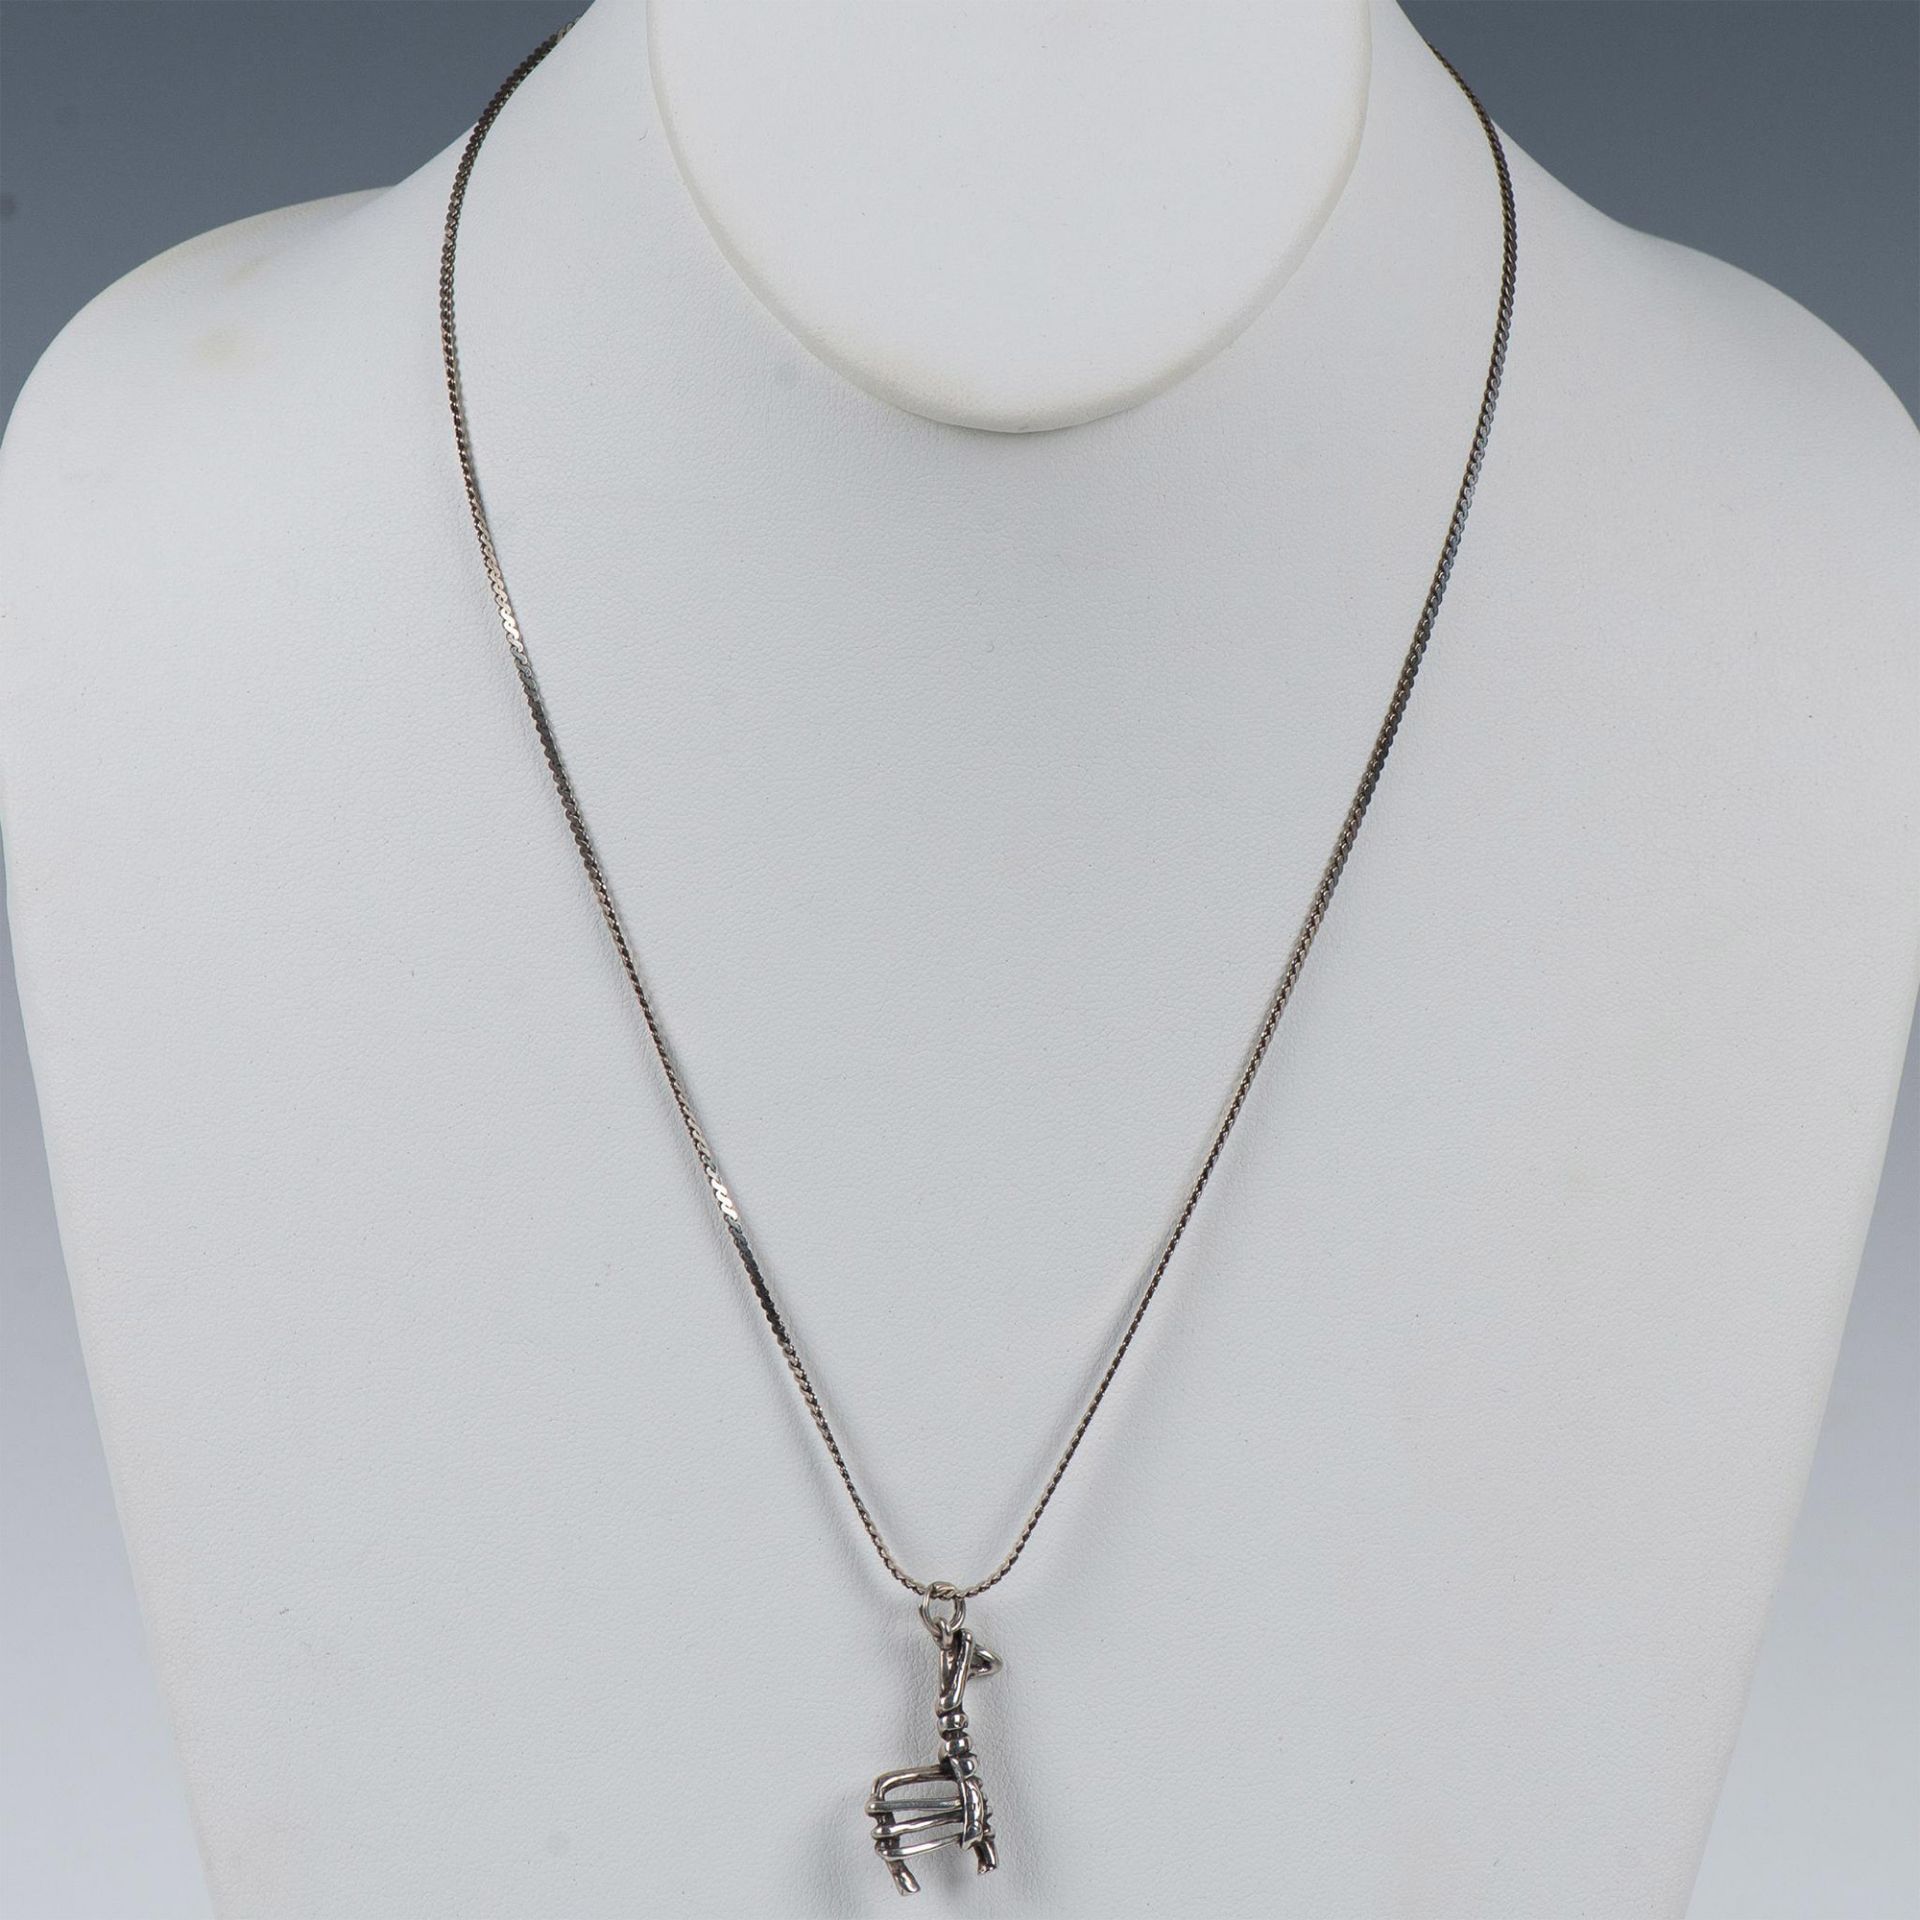 Silver Native American Stick Figure Horse Necklace - Image 2 of 7